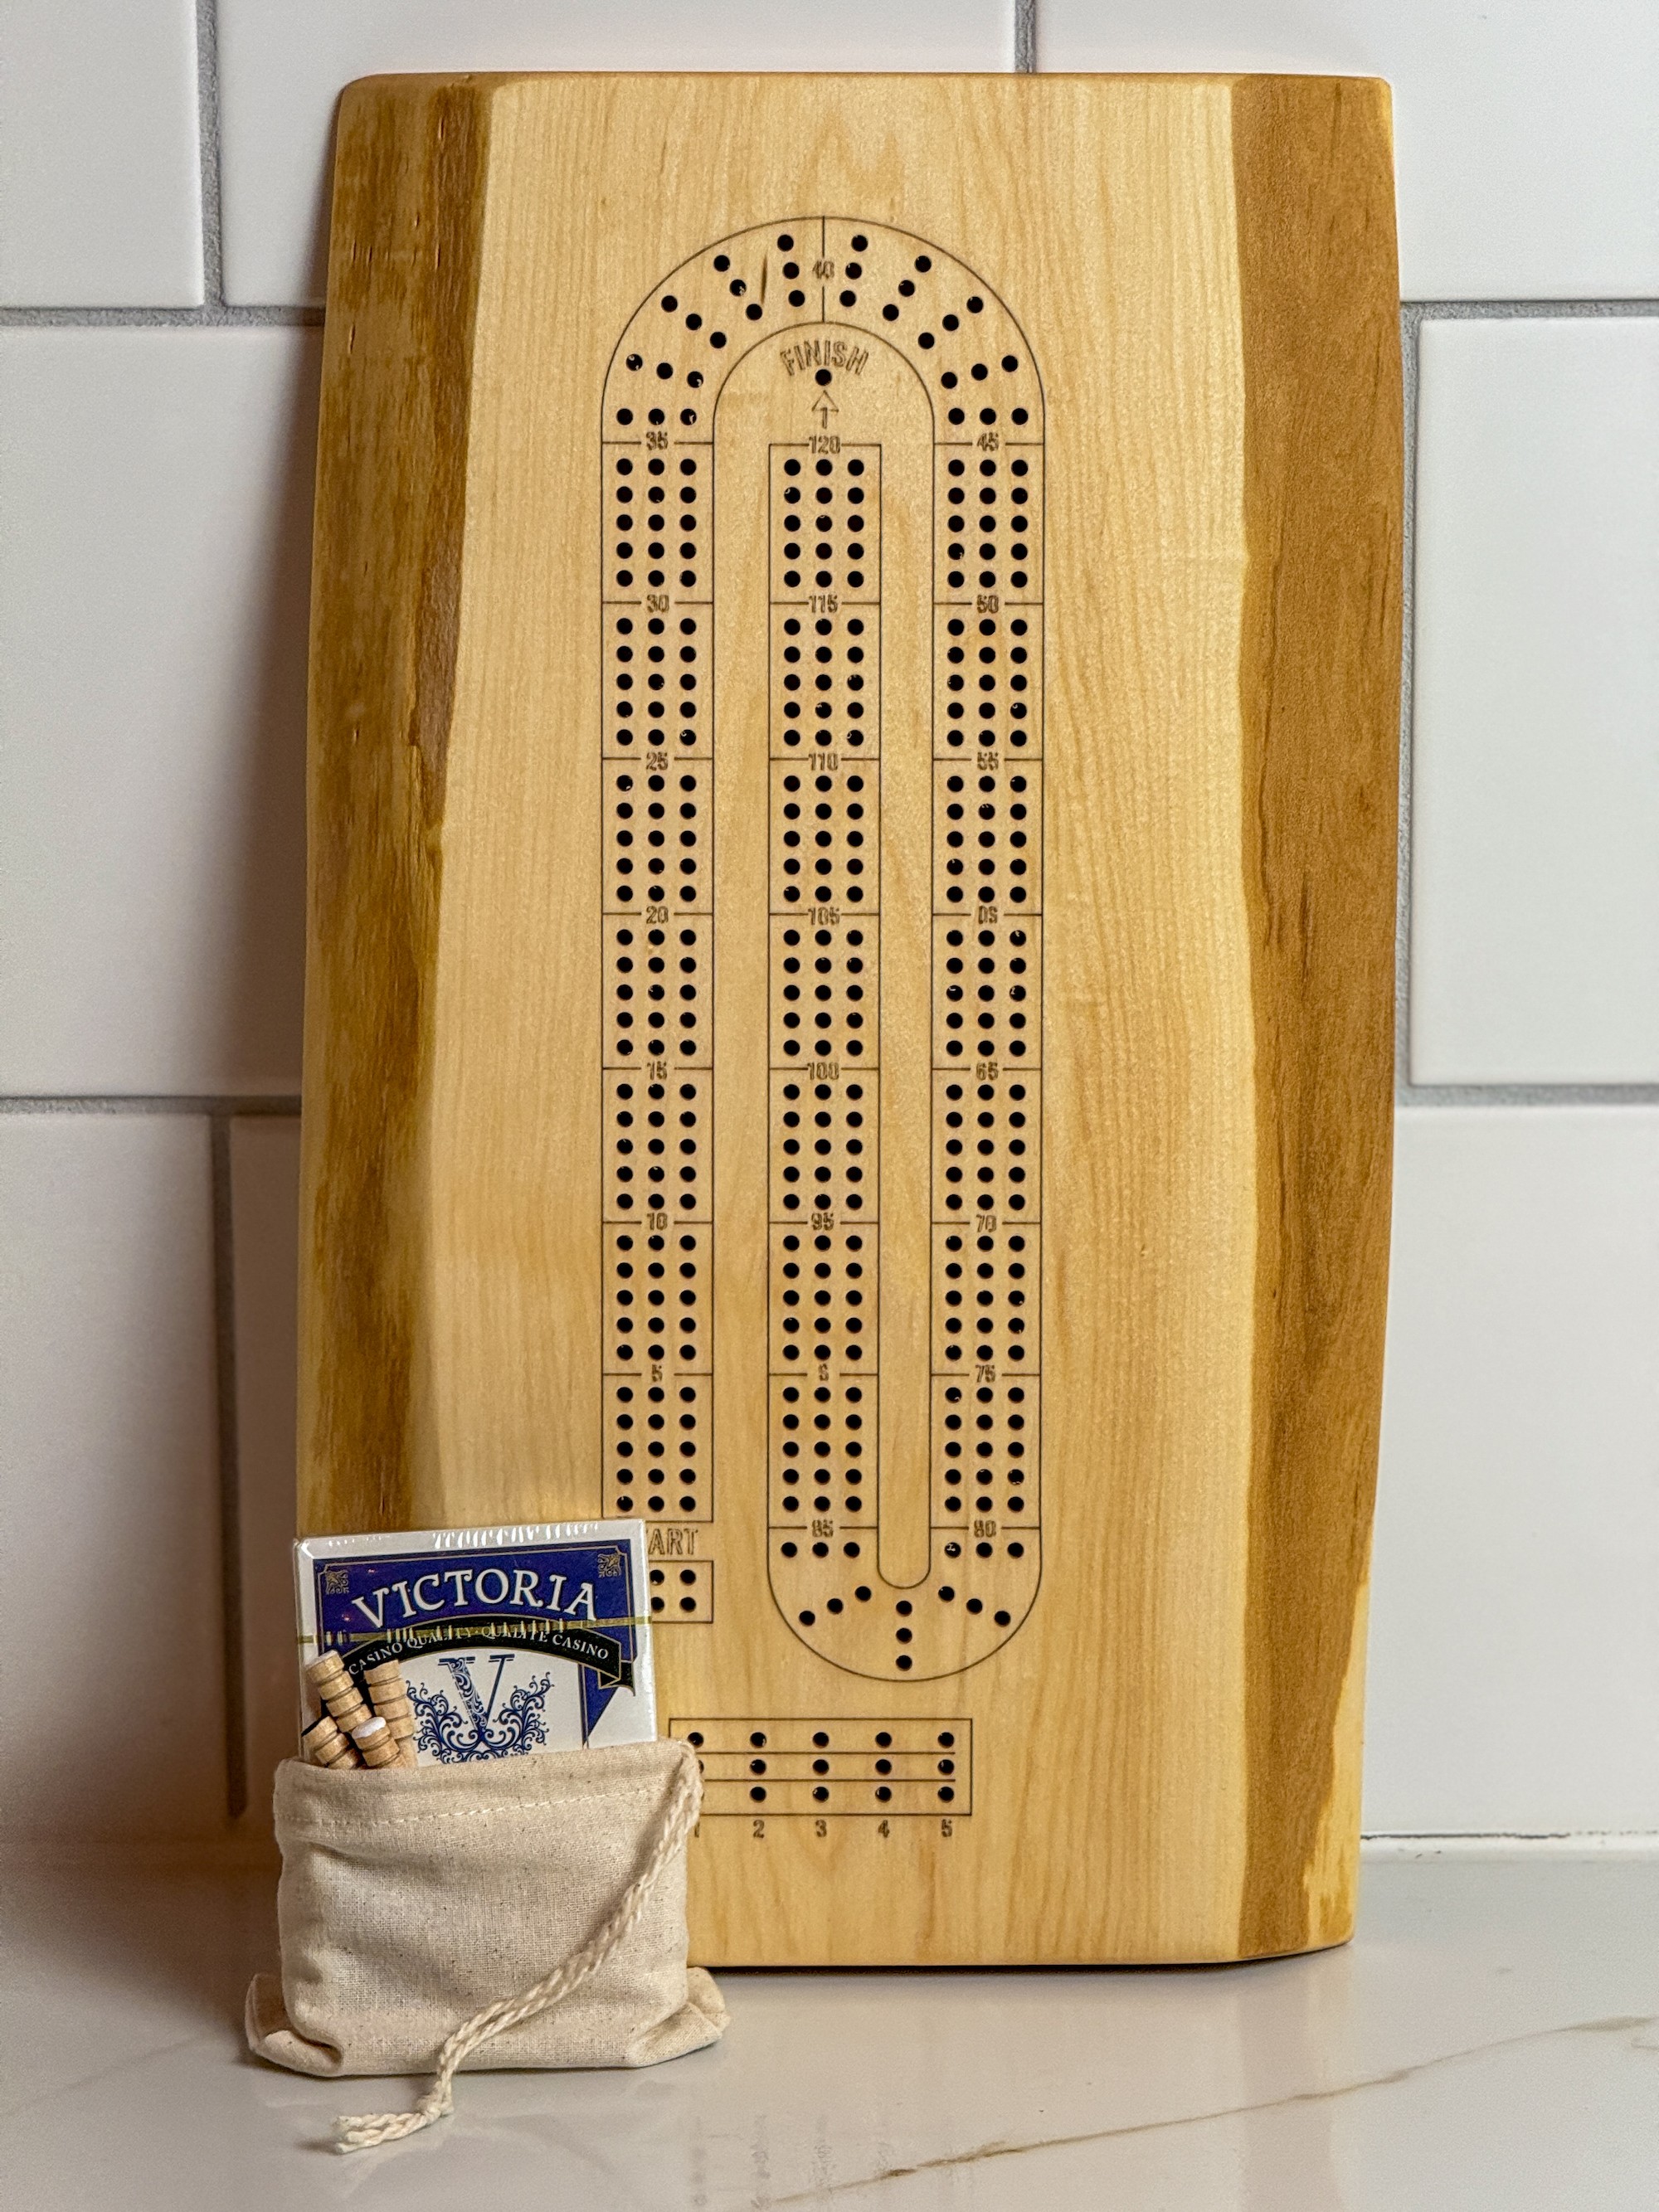 The nestling timbers crafted charcuterie board